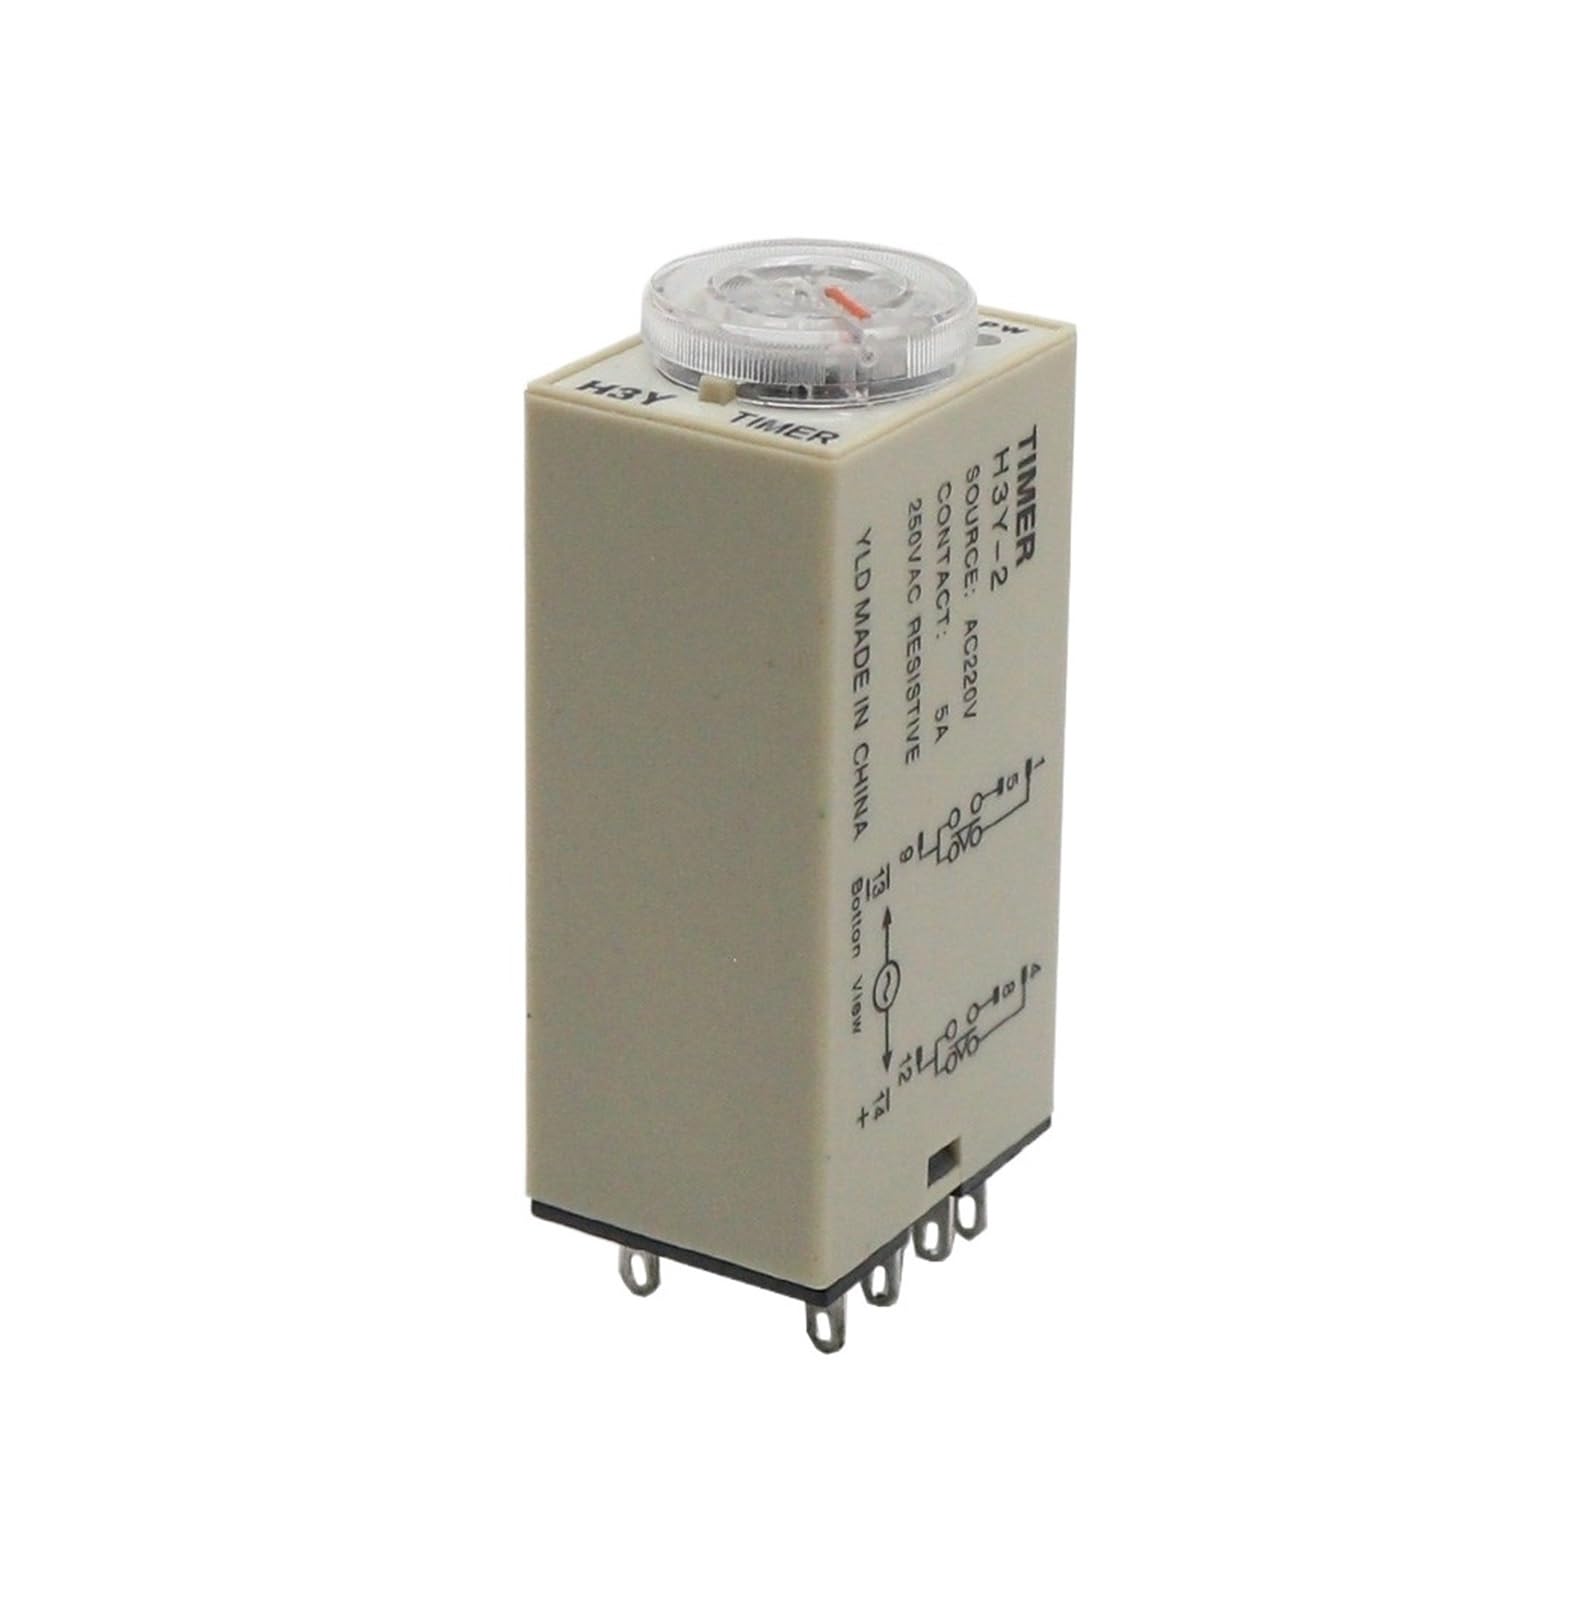 1pcs Power on Delay Time Relay H3Y-2 Small 8-pinDC12V24vAC220v Timer Switch 1S 3S 5S 30S 60S 5M 10M 30M 60M LABDIP(AC 220V,H3Y-2 10Minute) von LABDIP